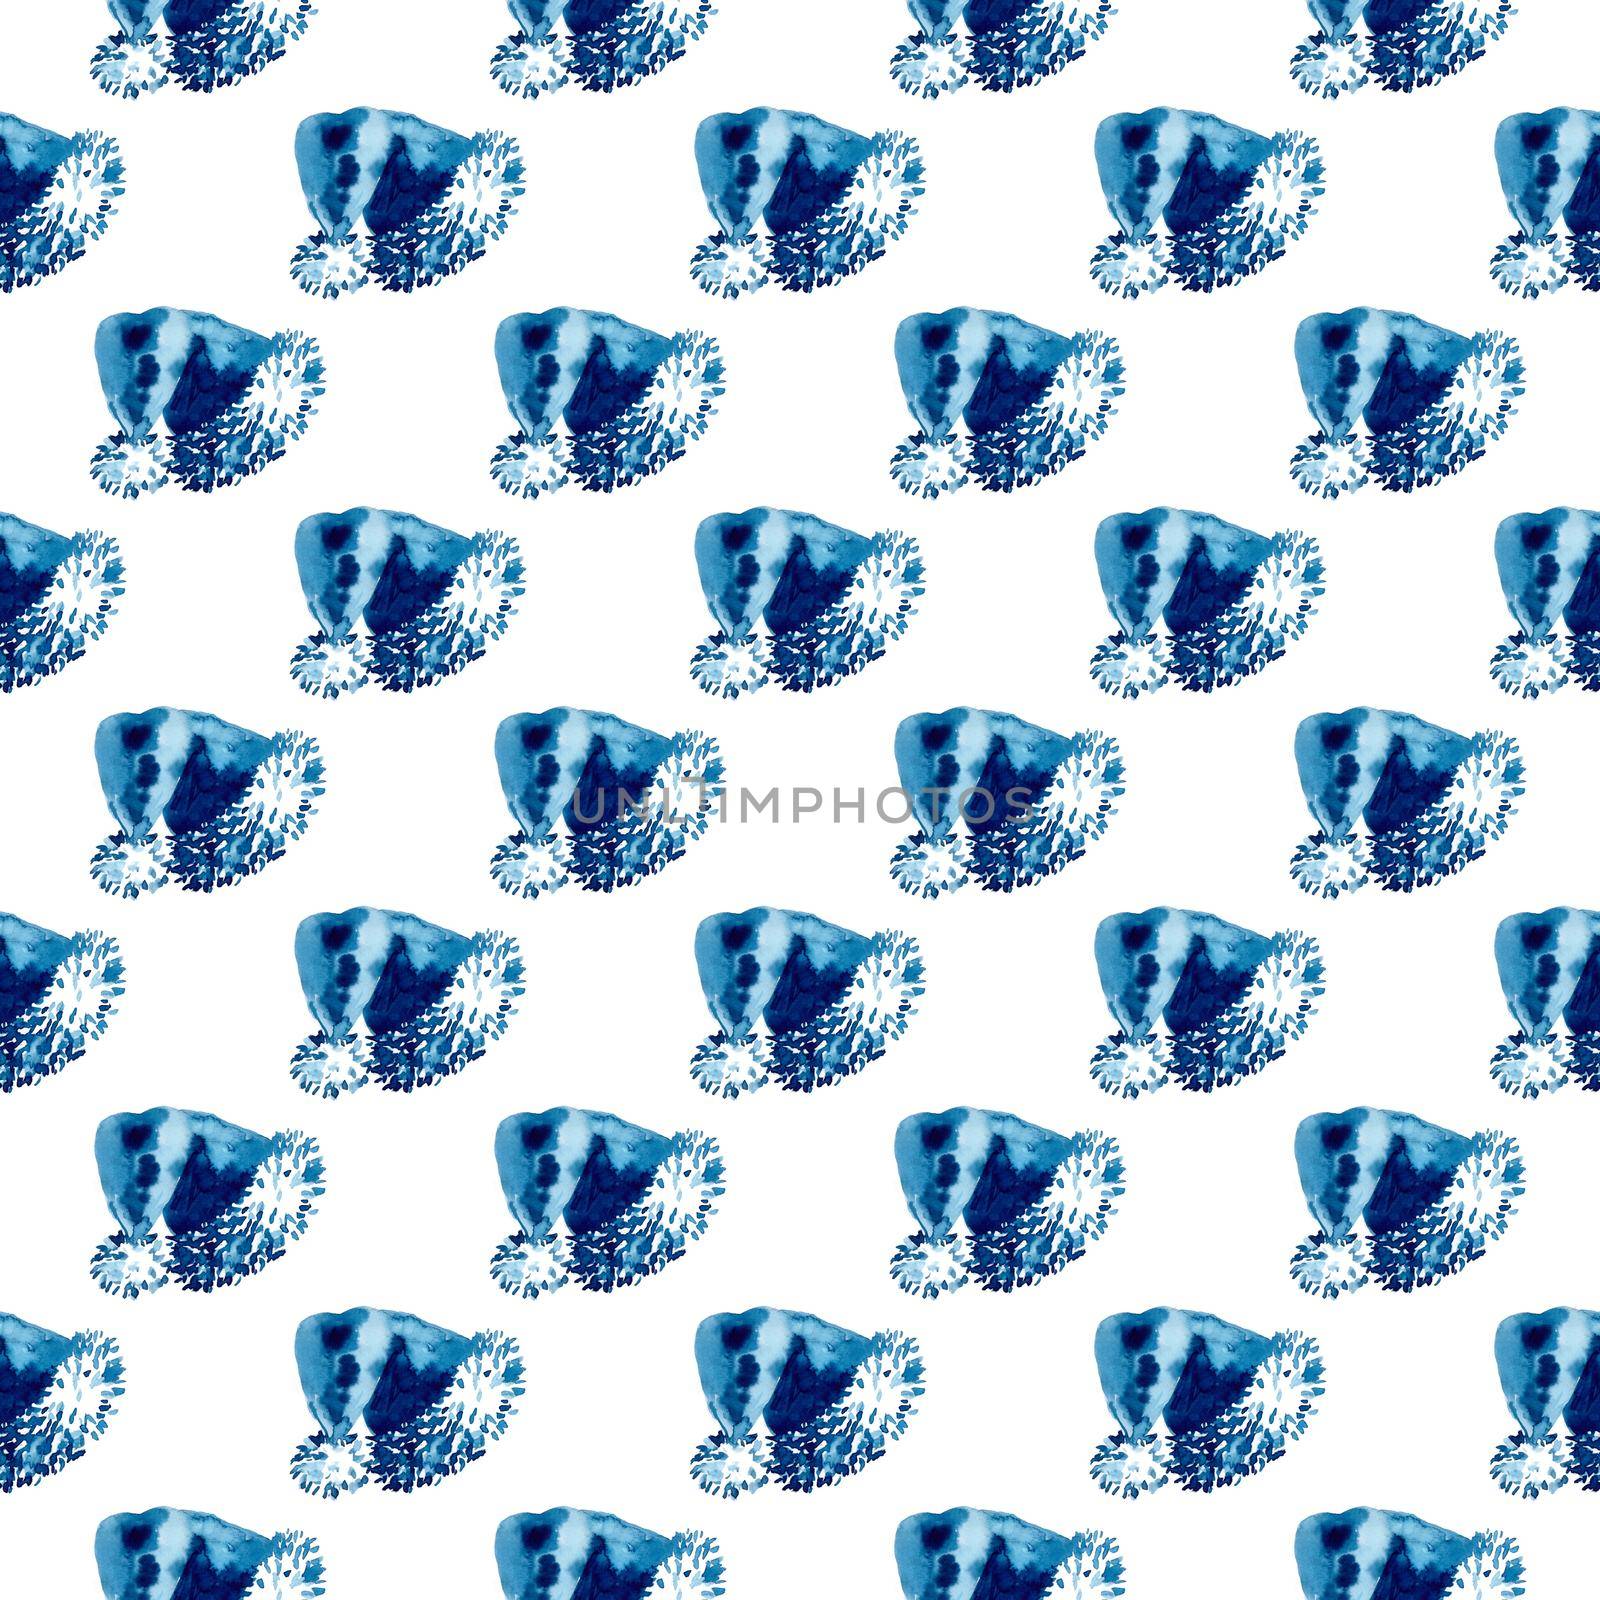 XMAS watercolor Santa Claus Hat Seamless Pattern in Blue Color. Hand PaintedCap Costume background or wallpaper for Ornament, Wrapping or Christmas Gift by DesignAB